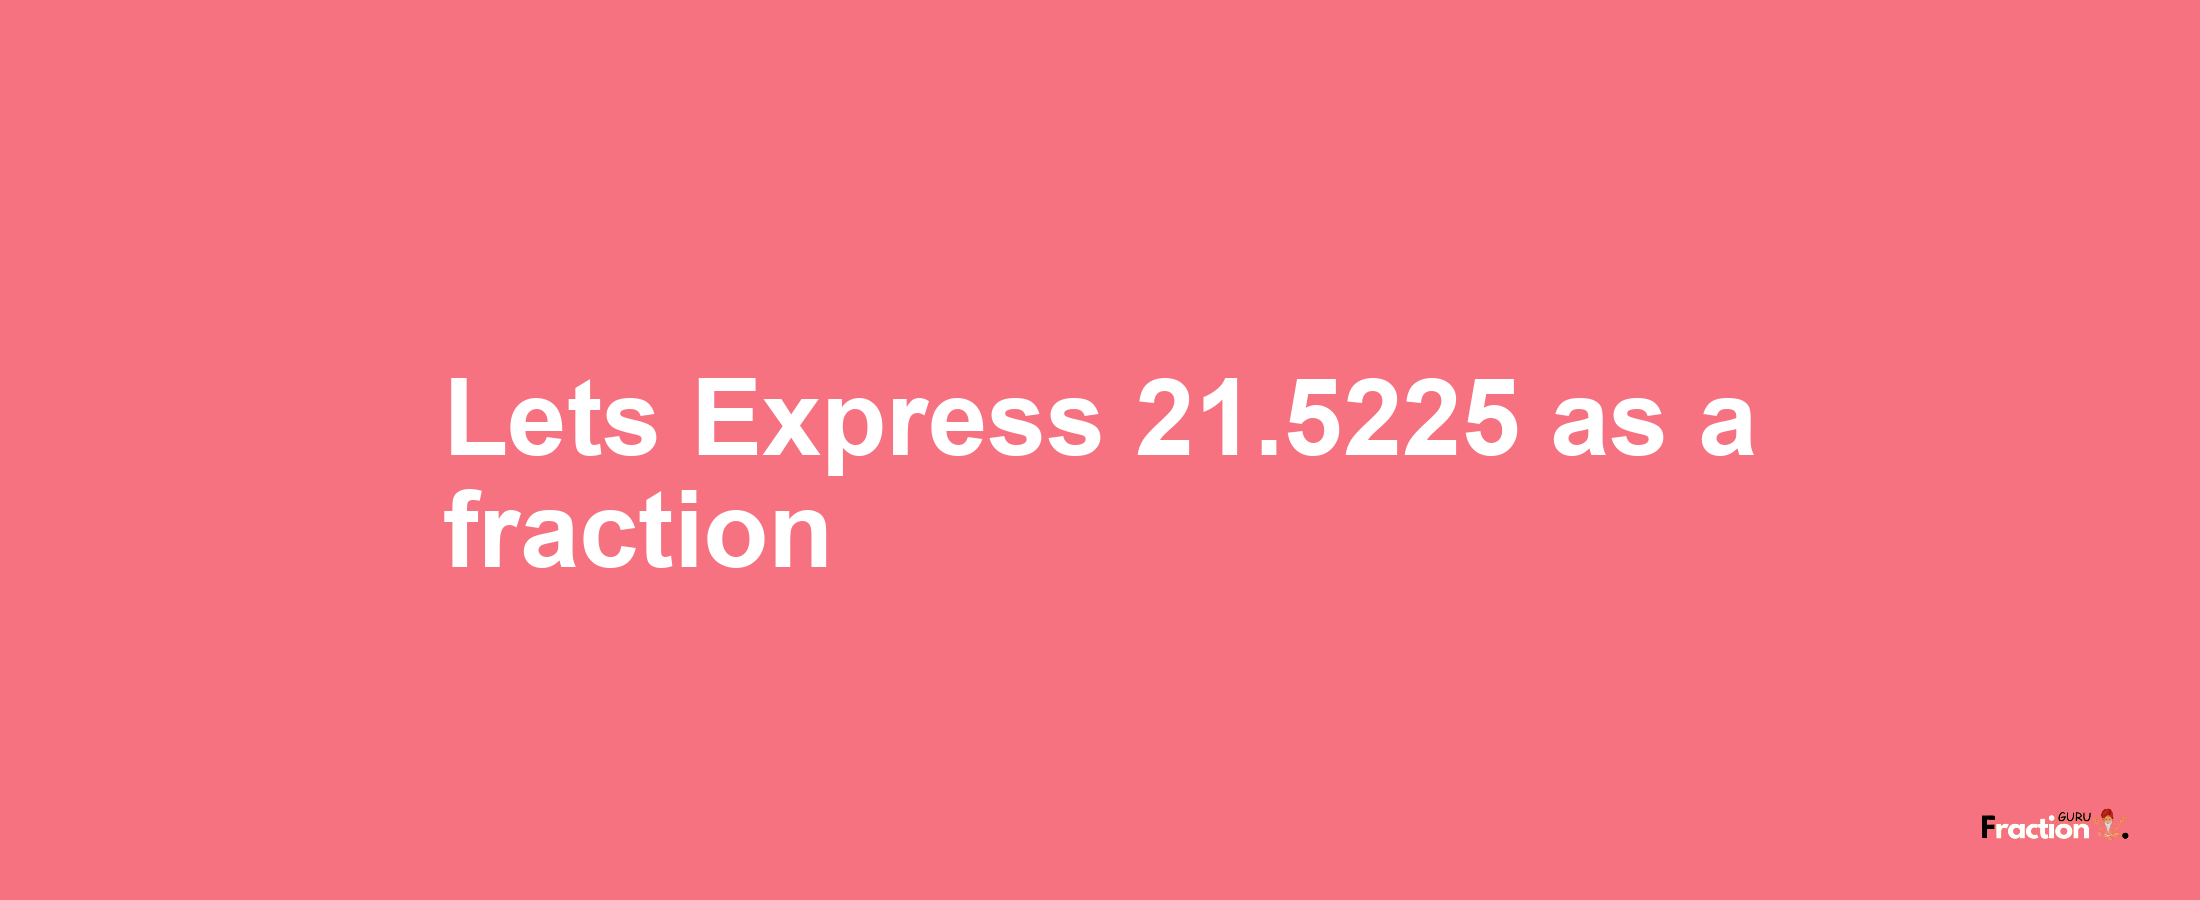 Lets Express 21.5225 as afraction